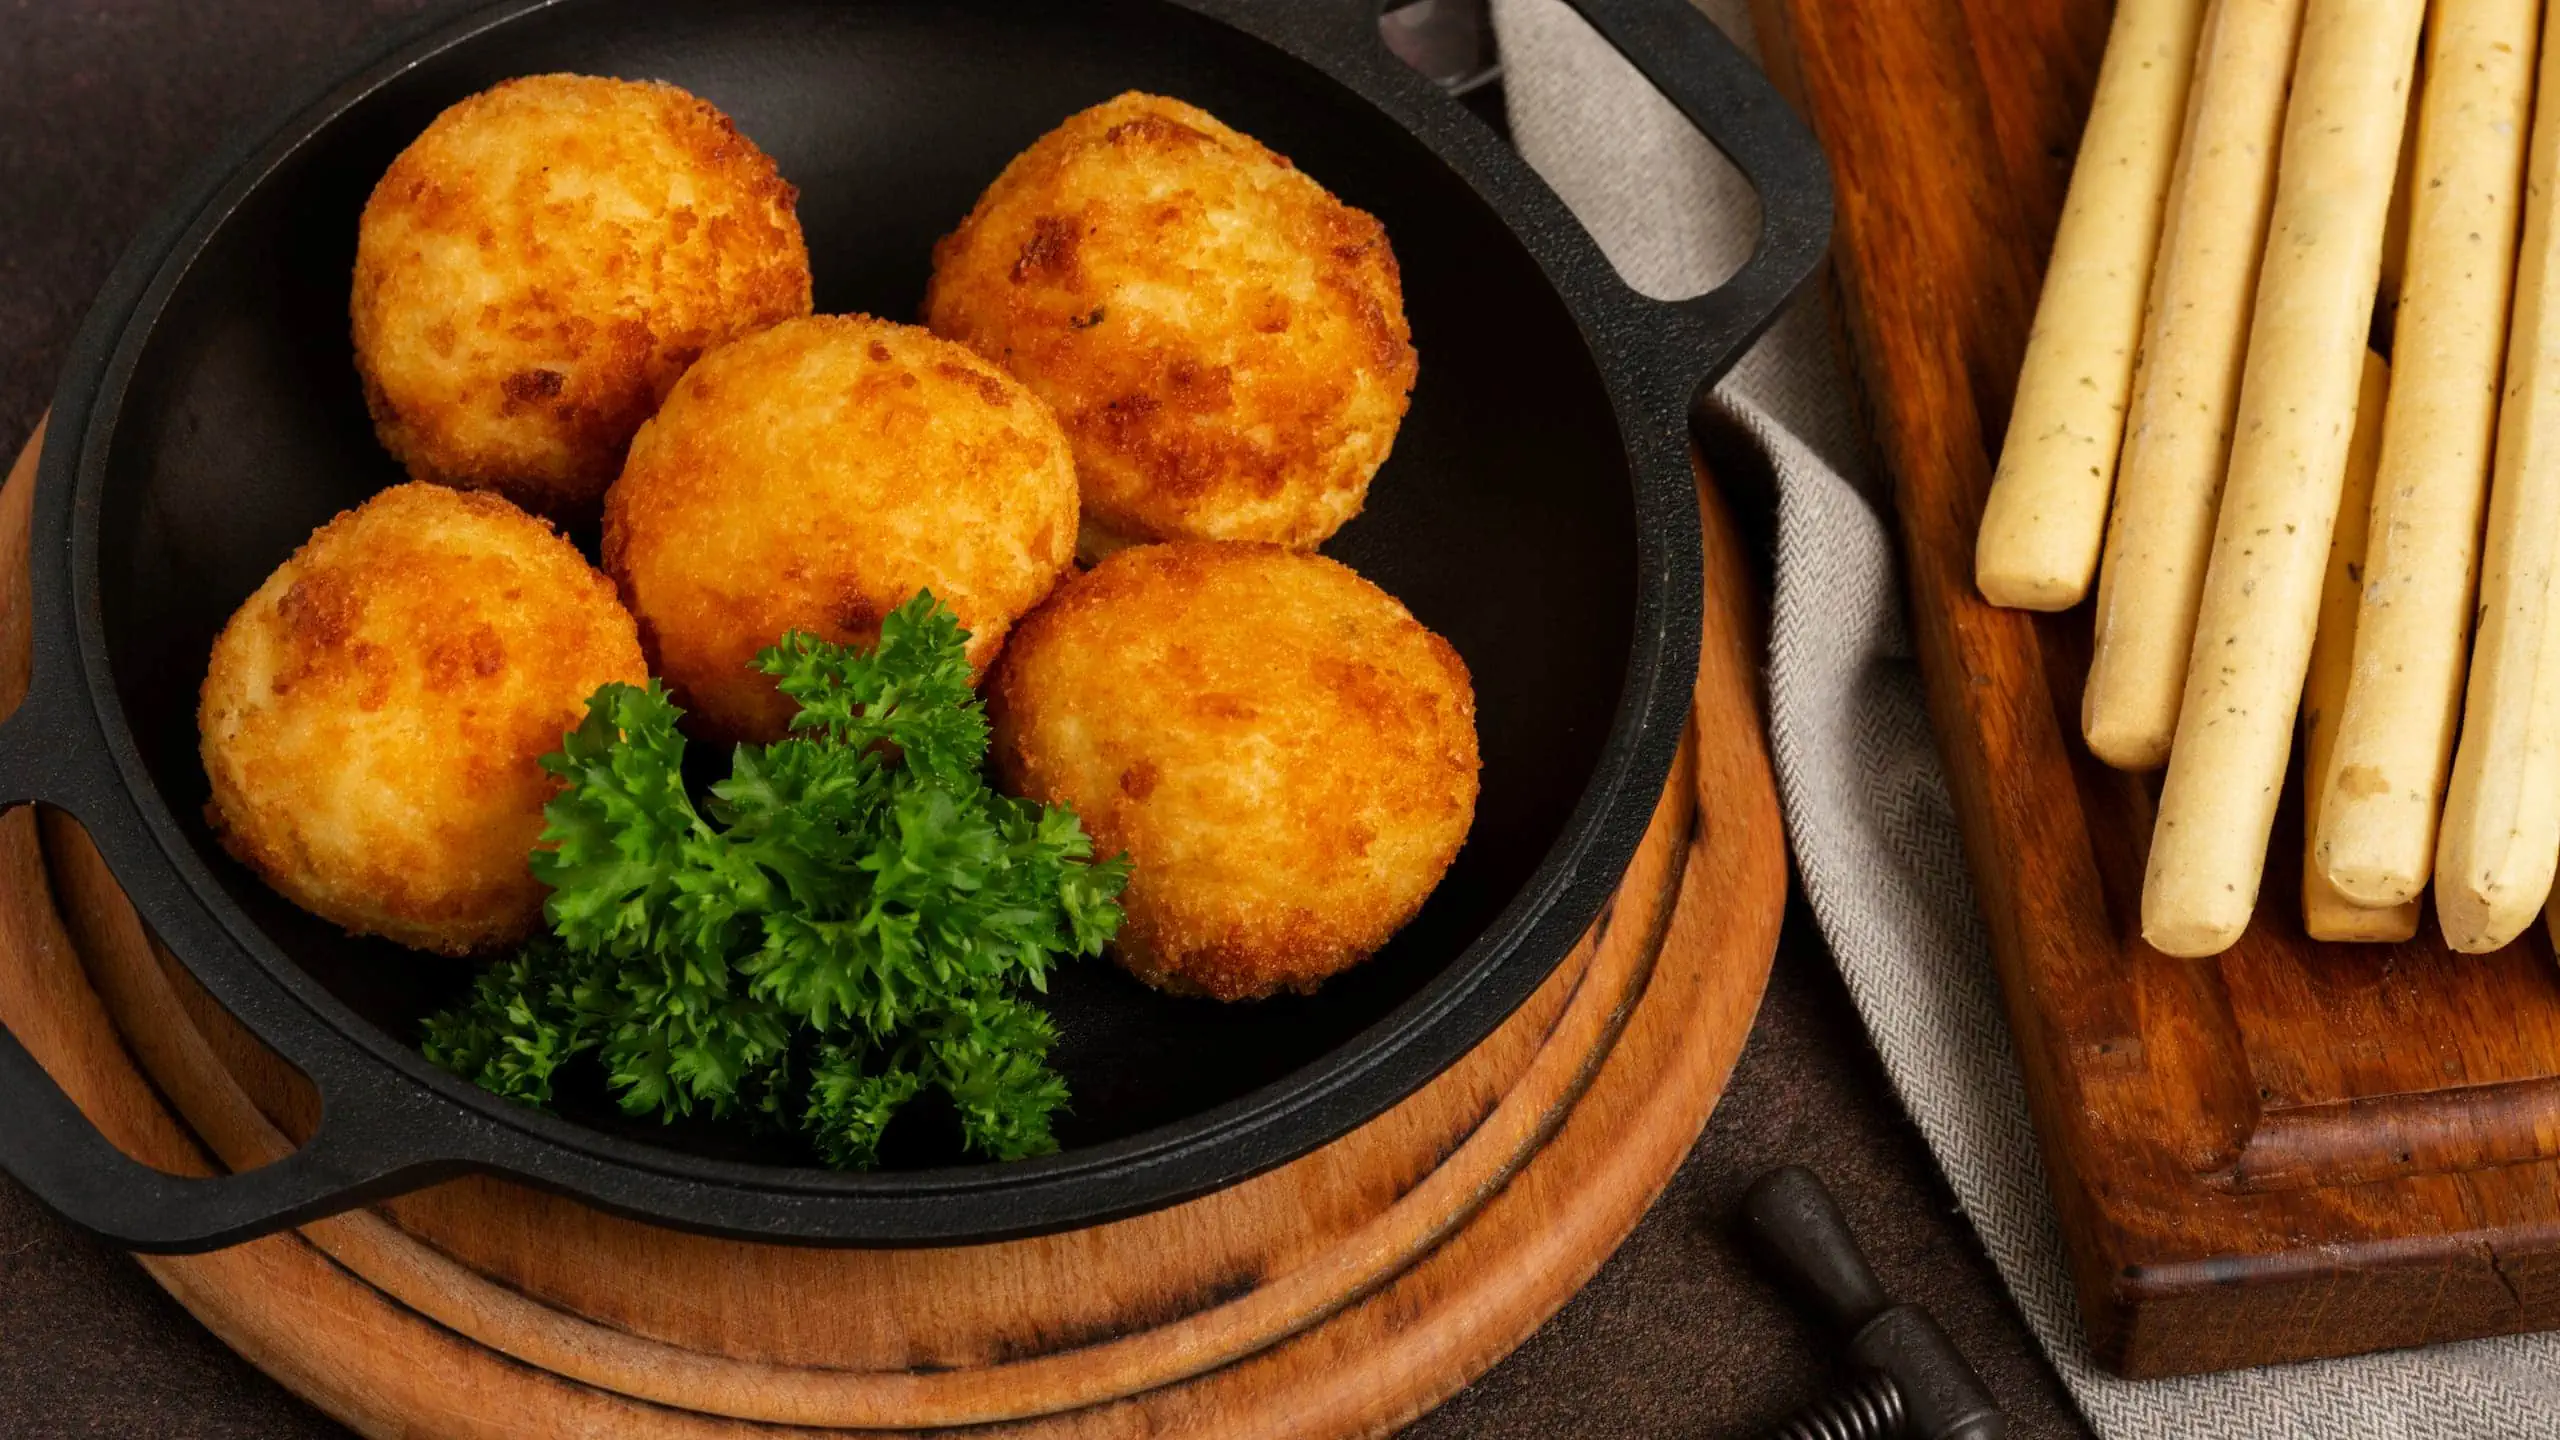 Our version for Pioneer Woman's hush puppies recipe